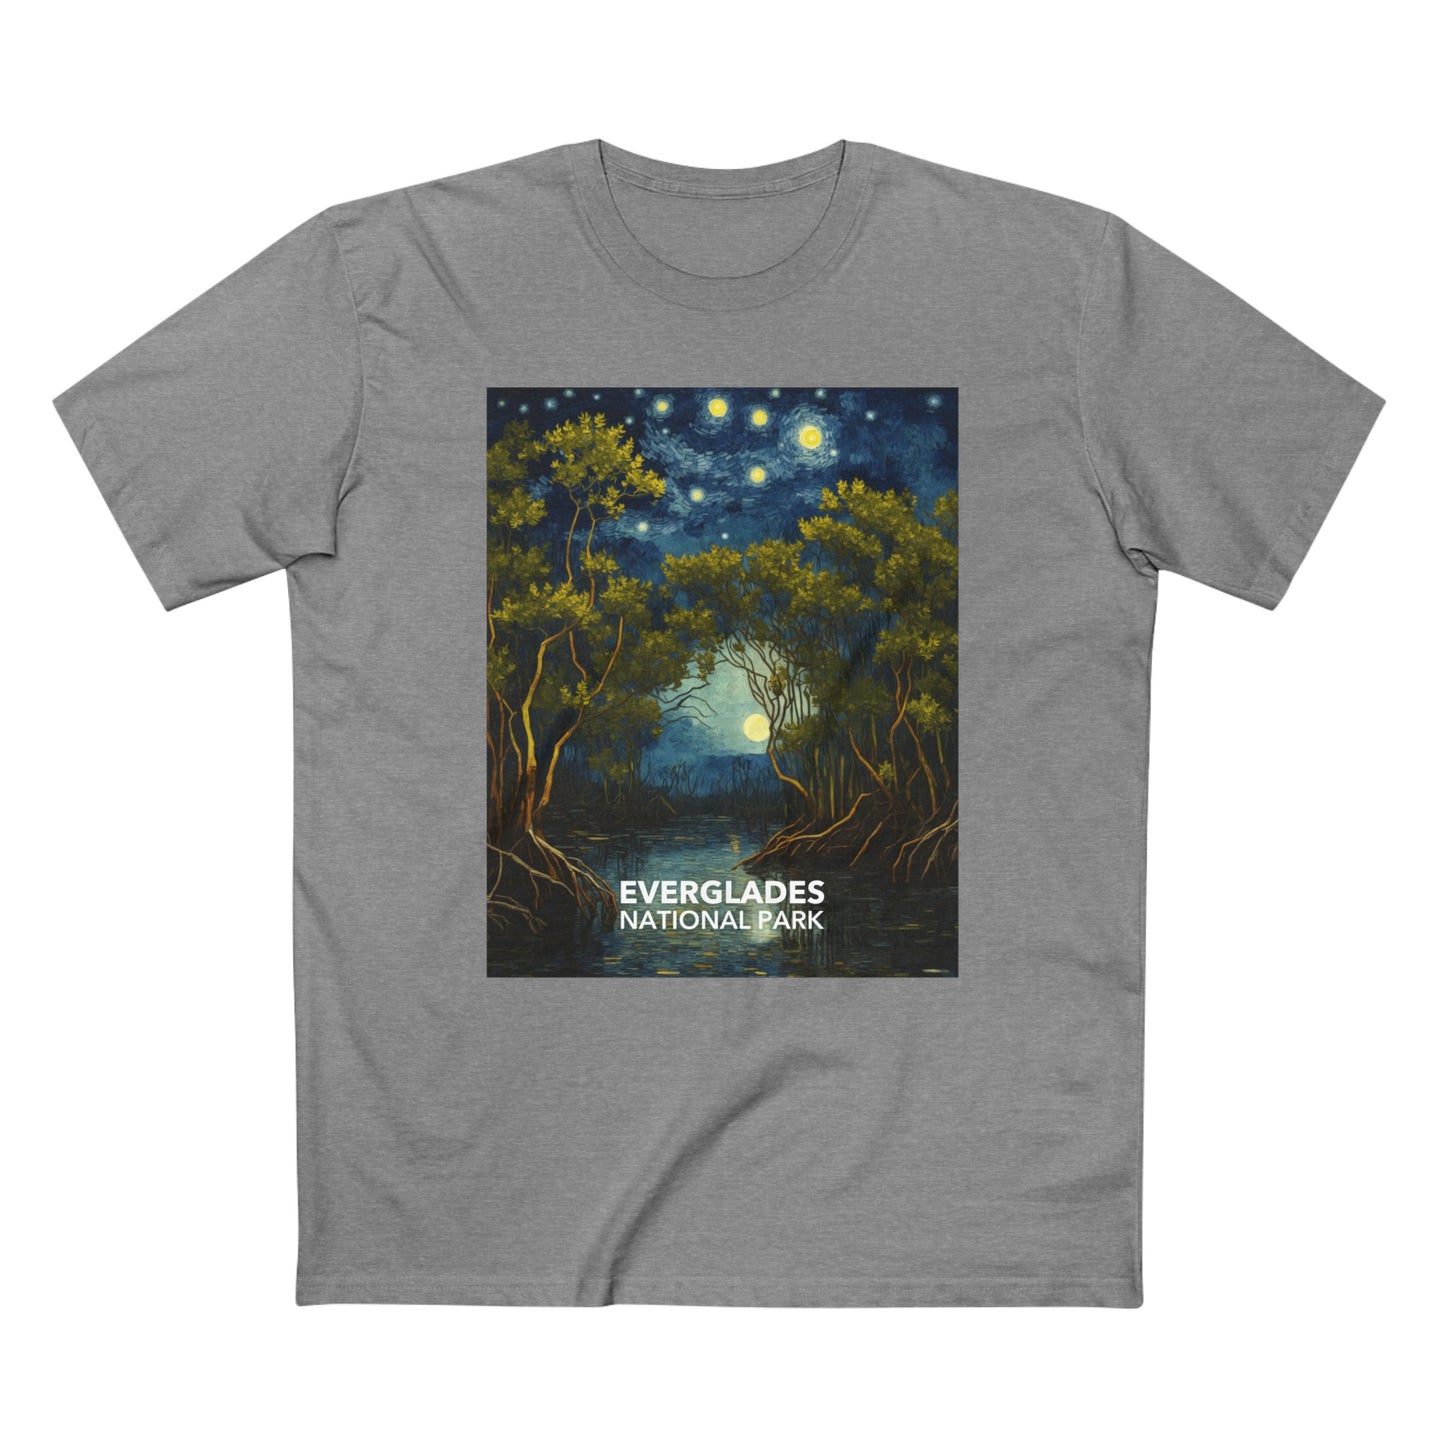 Everglades National Park T-Shirt - The Starry Night